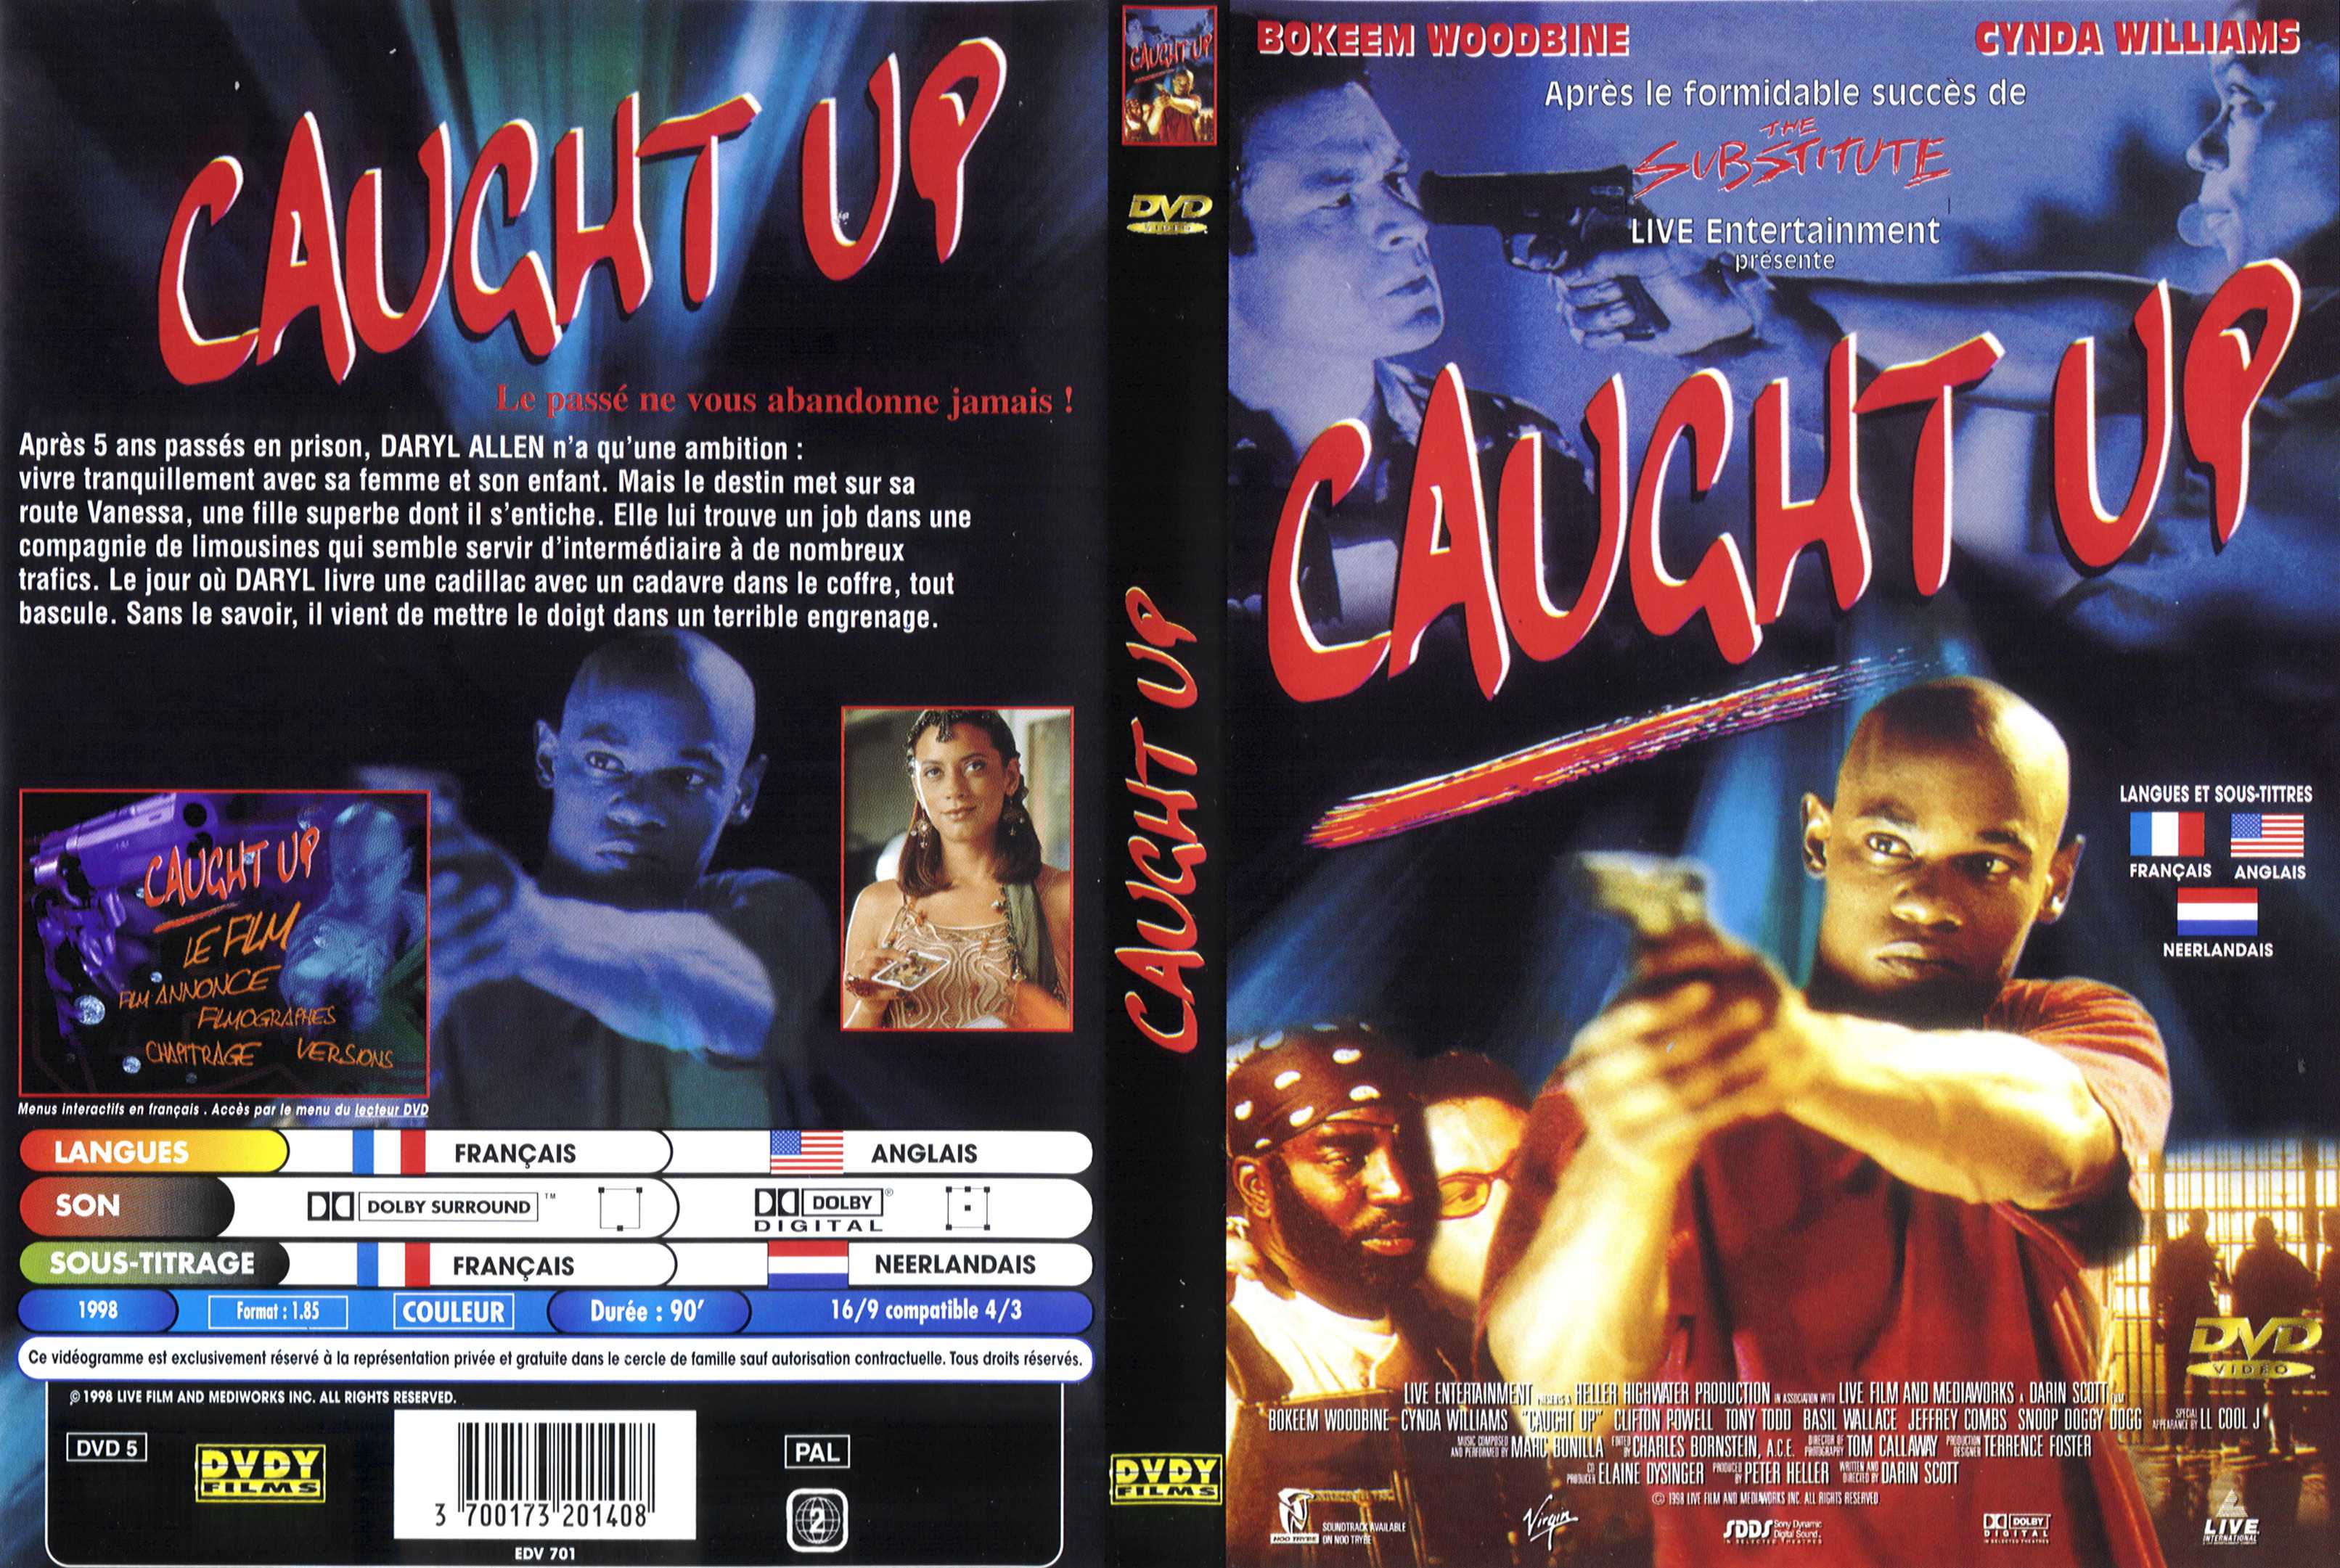 Jaquette DVD Caught up